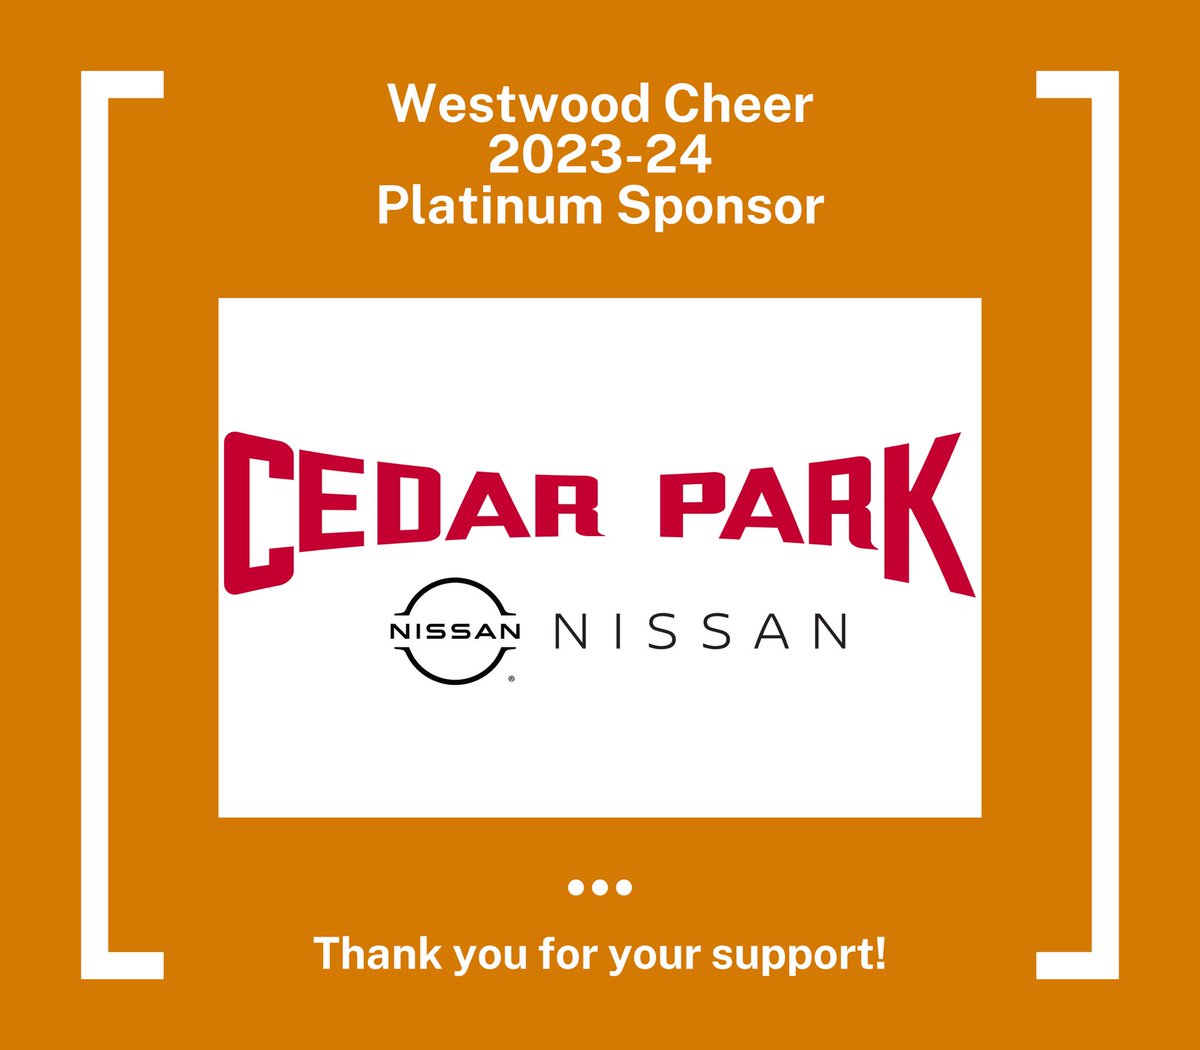 Happy to announce that @CedarParkNissan is a 2023-24 sponsor for Westwood Cheer! Thank you so much for the support! 🧡 cedarparknissan.com